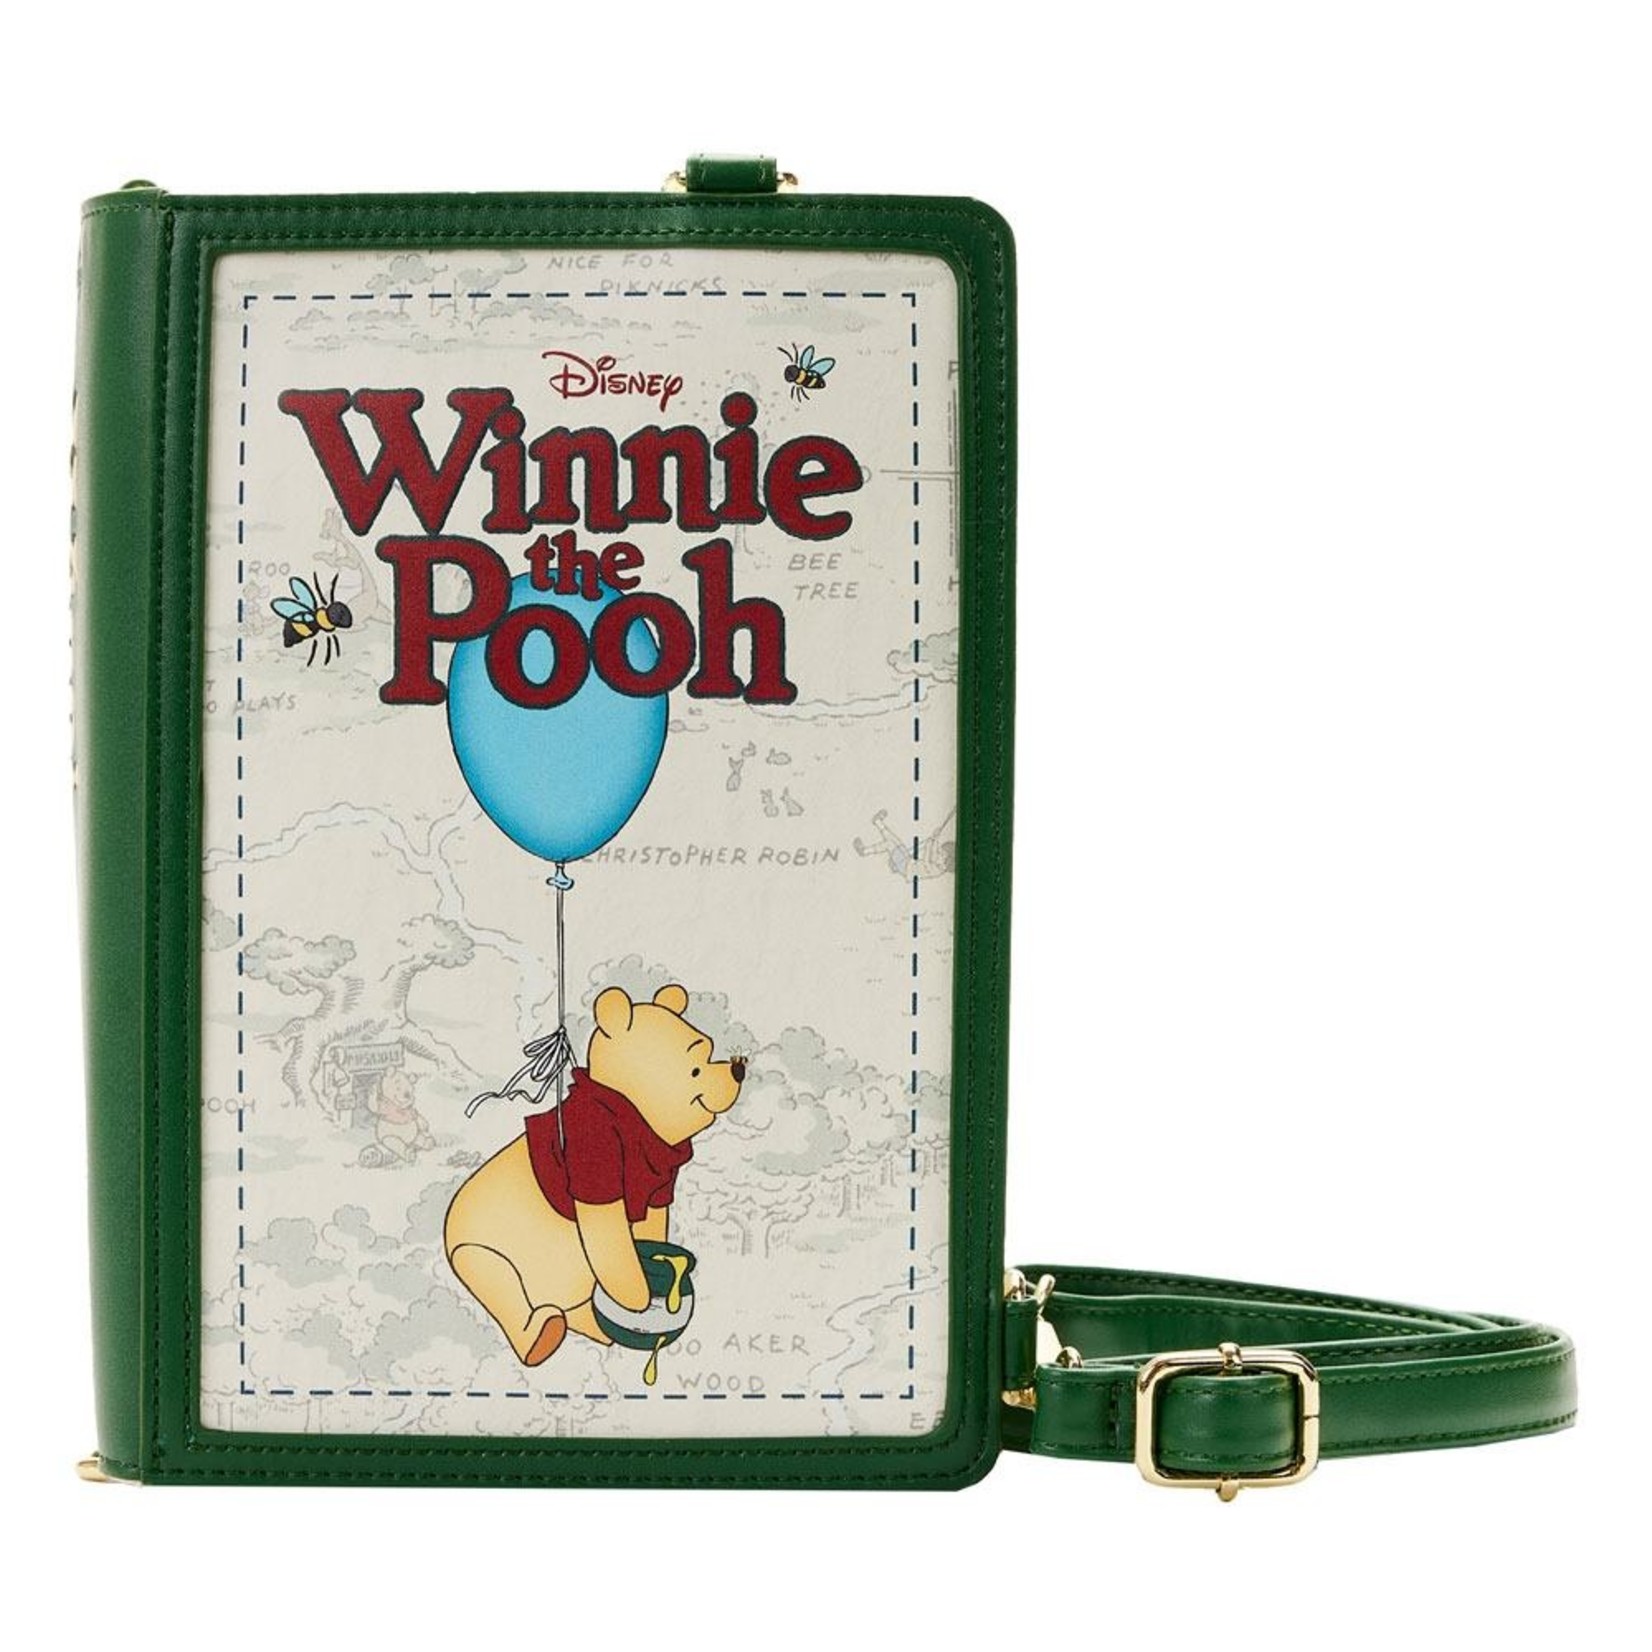 Loungefly Loungefly Disney Winnie the Pooh Classic Book Convertible Cross Body Bag